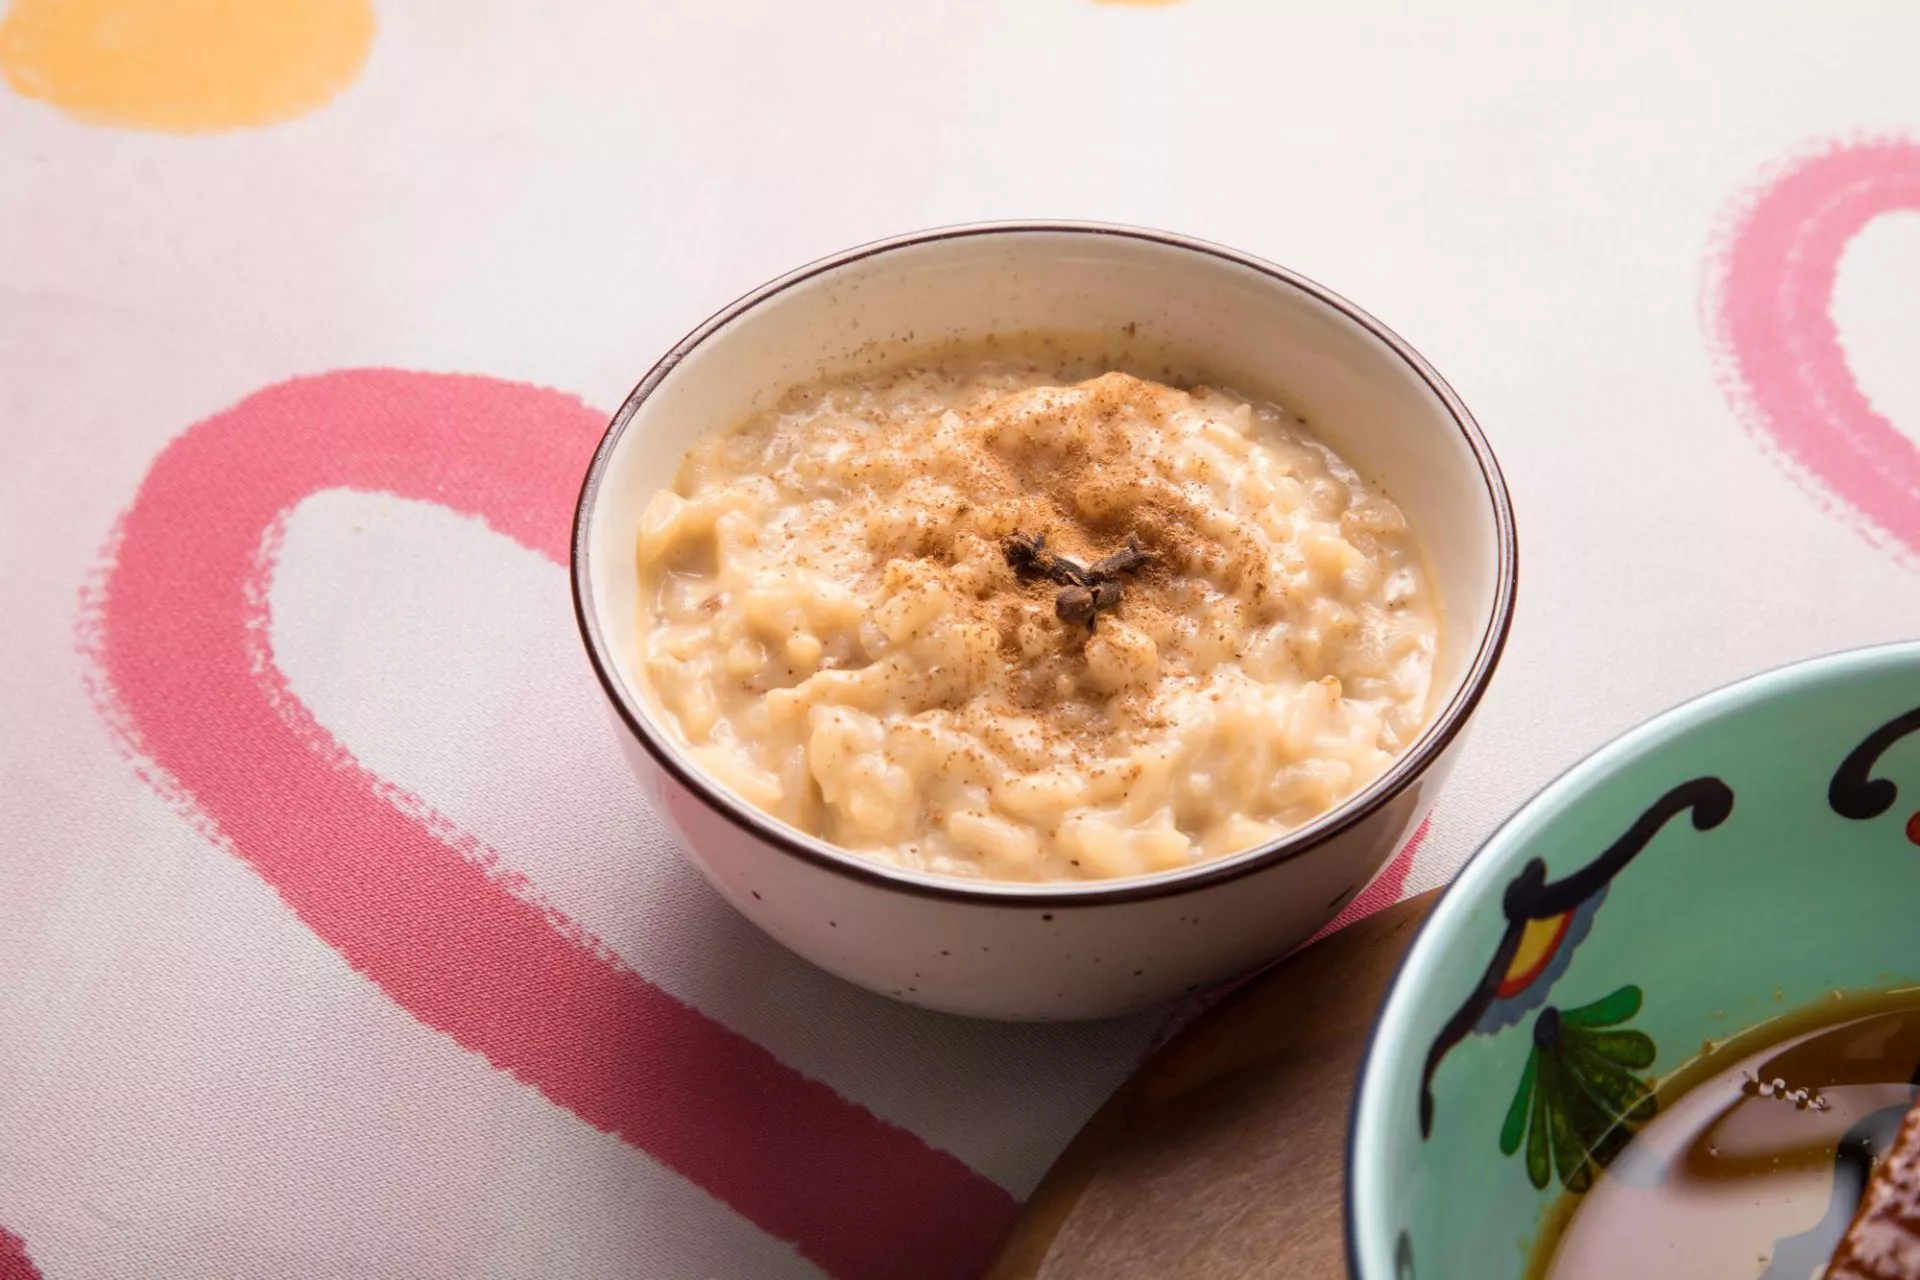 How to Make Porridge in the Microwave